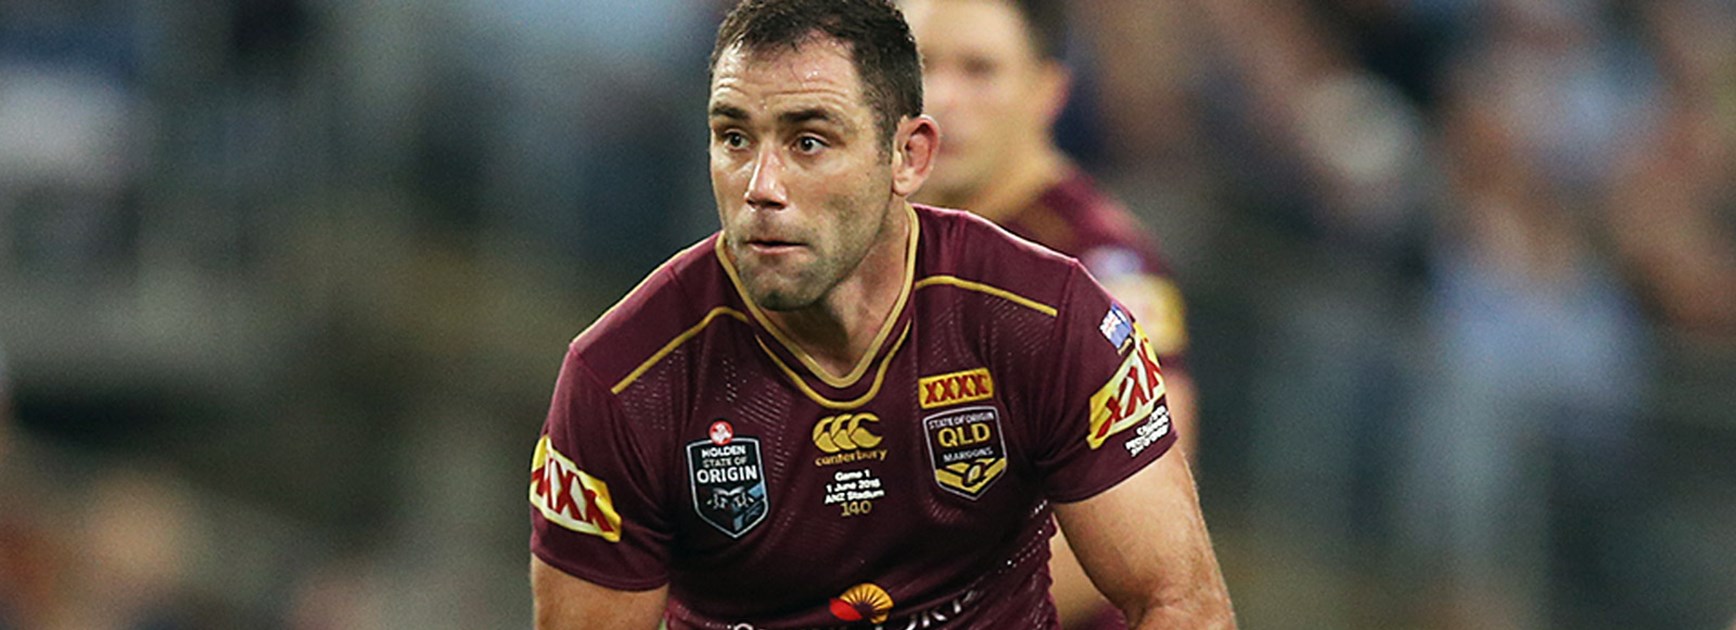 Queensland captain Cameron Smith in his 37th appearance for the Maroons.